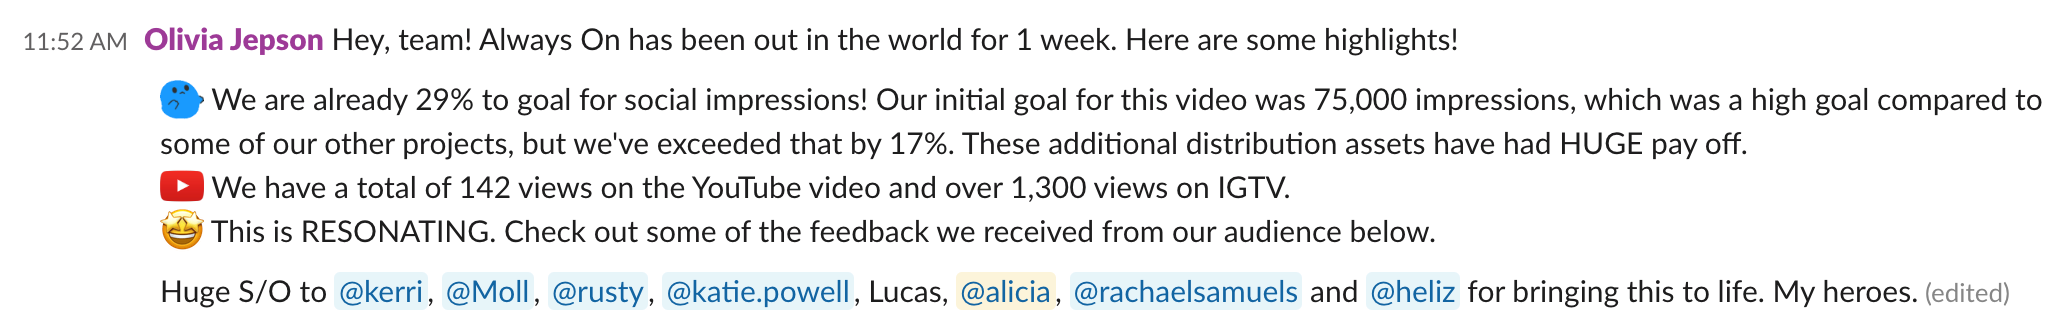 Slack message sharing the first week of social results for a video campaign